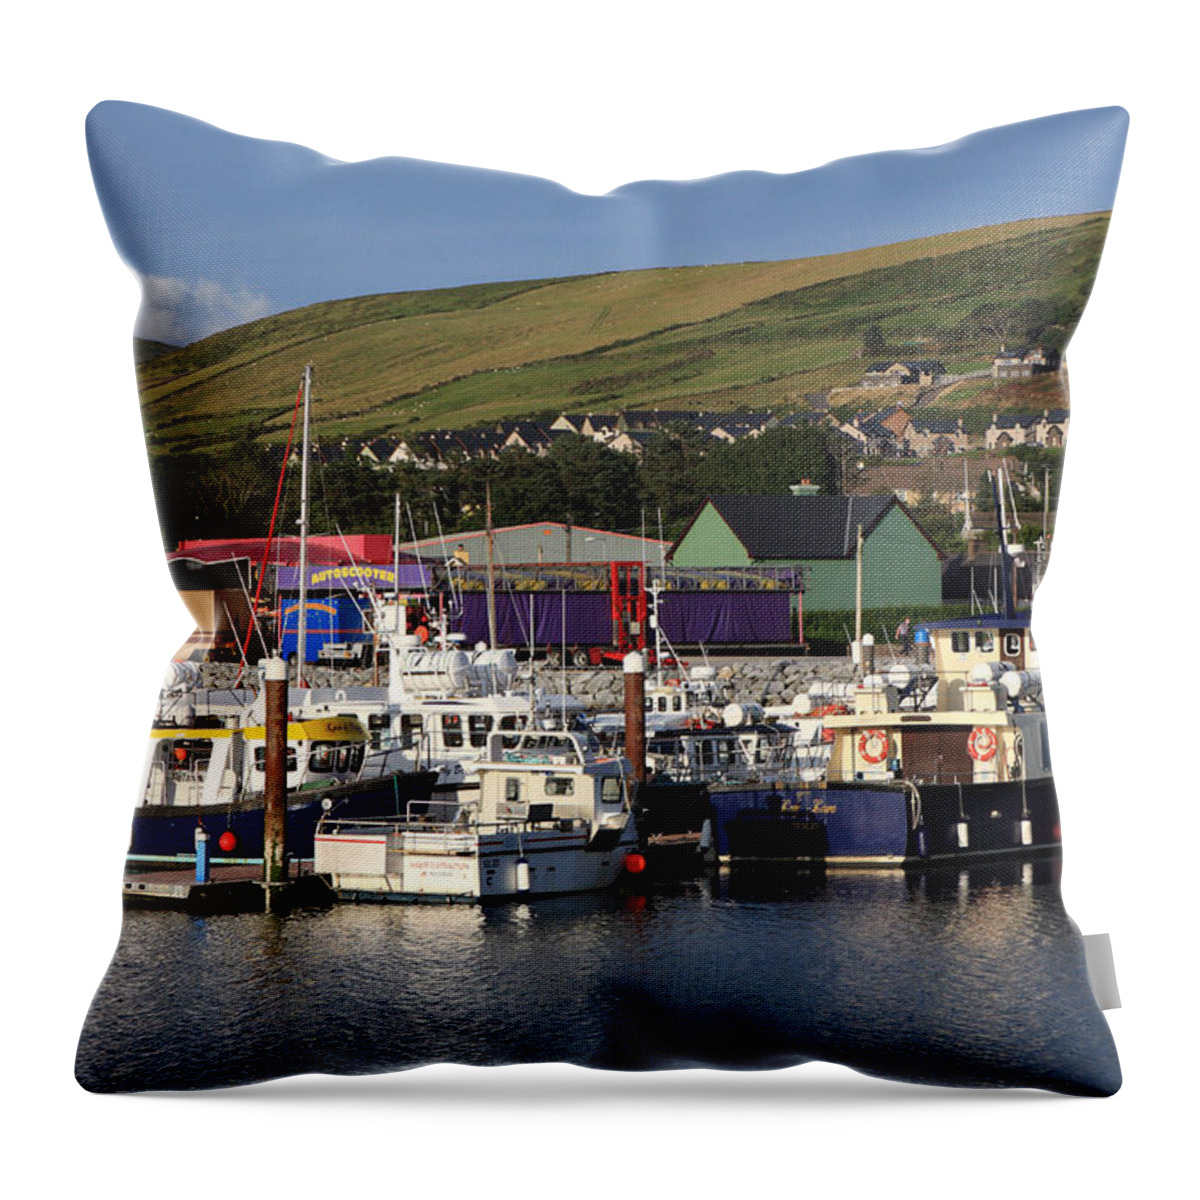 Dingle Throw Pillow featuring the photograph Dingle Harbour County Kerry Ireland by Aidan Moran